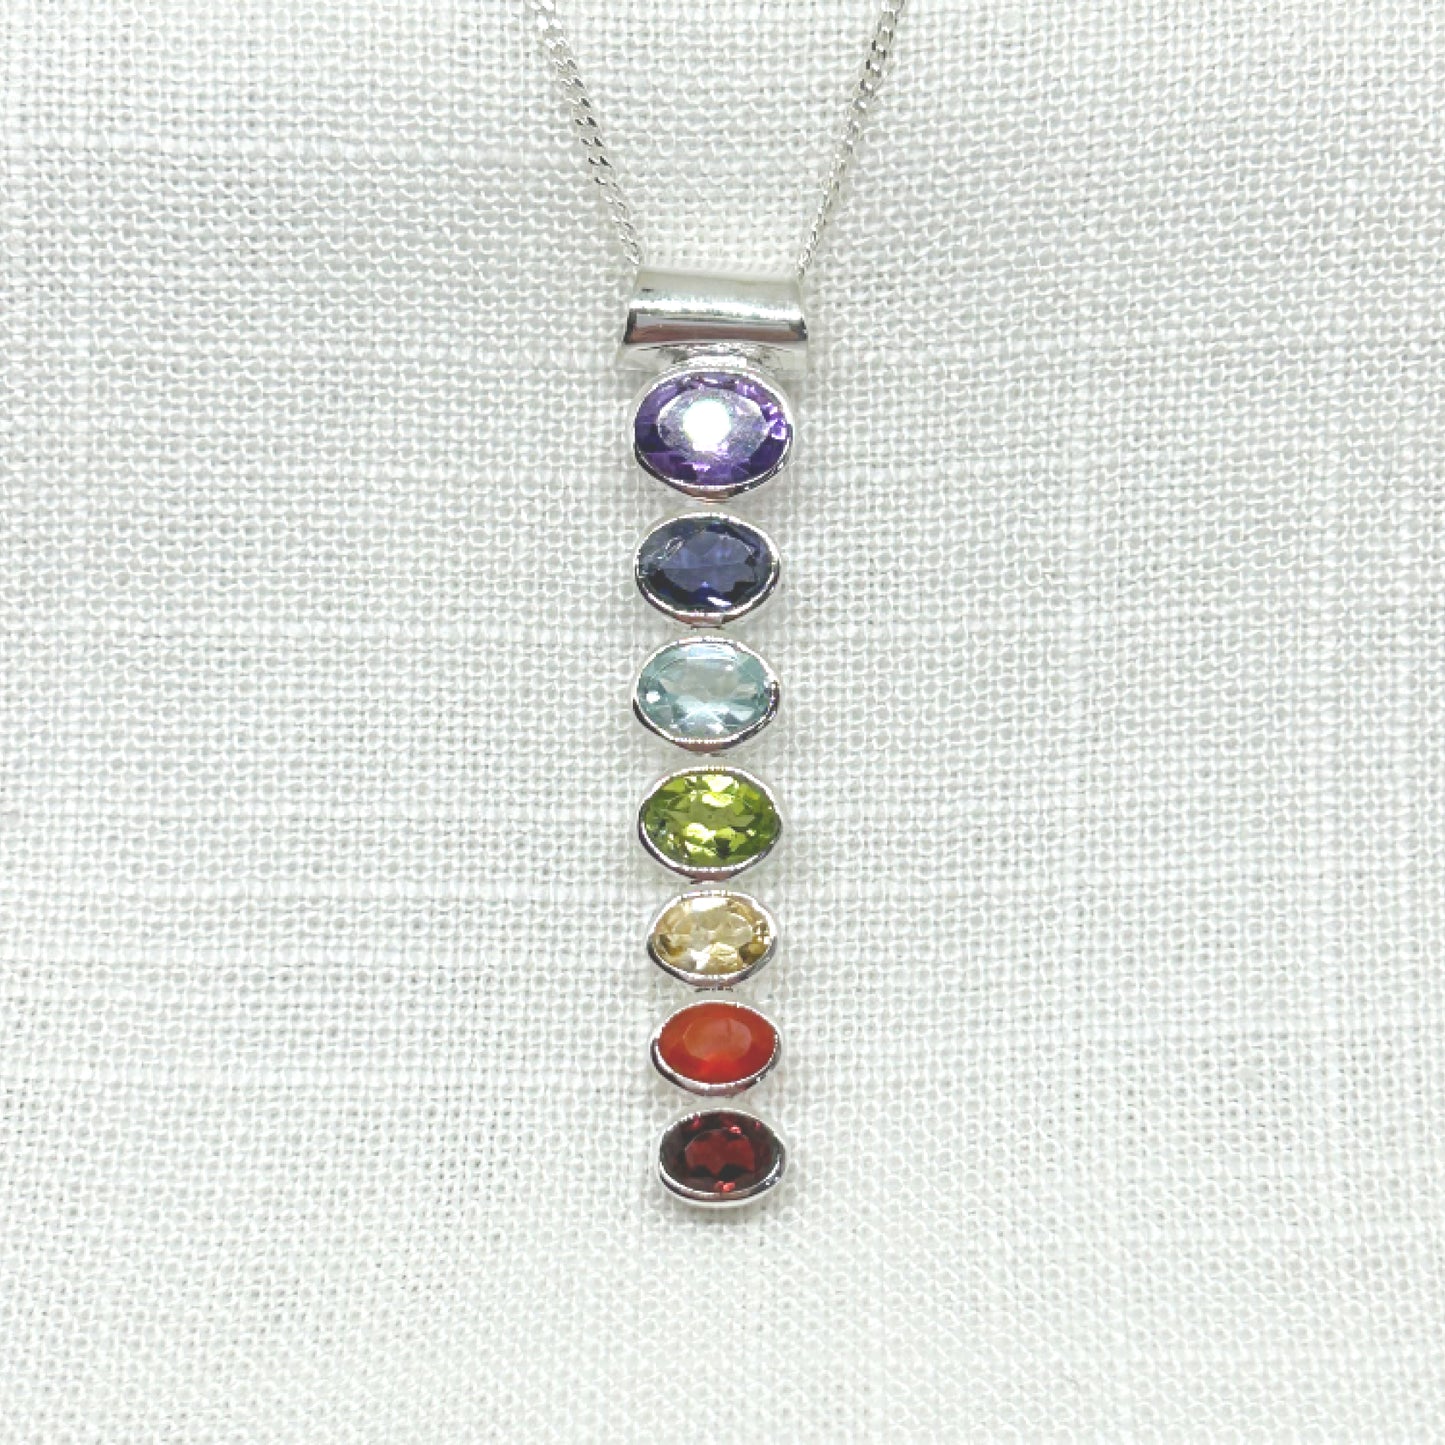 This heavier weight genuine faceted gemstone pendant includes all the essentials of the seven Chakras. These multi coloured gemstones represent the colours of the energy centres within the body know as Chakra points. Amethyst, Iolite, Topaz, Peridot, Citrine, Carnelian, Garnet Size: 5.2cm Long x 1.1cm Wide. Weight is 6.44g All pendants come supplied on a 20 inch sterling silver chain inside a tarnish proof bag and a gift box.